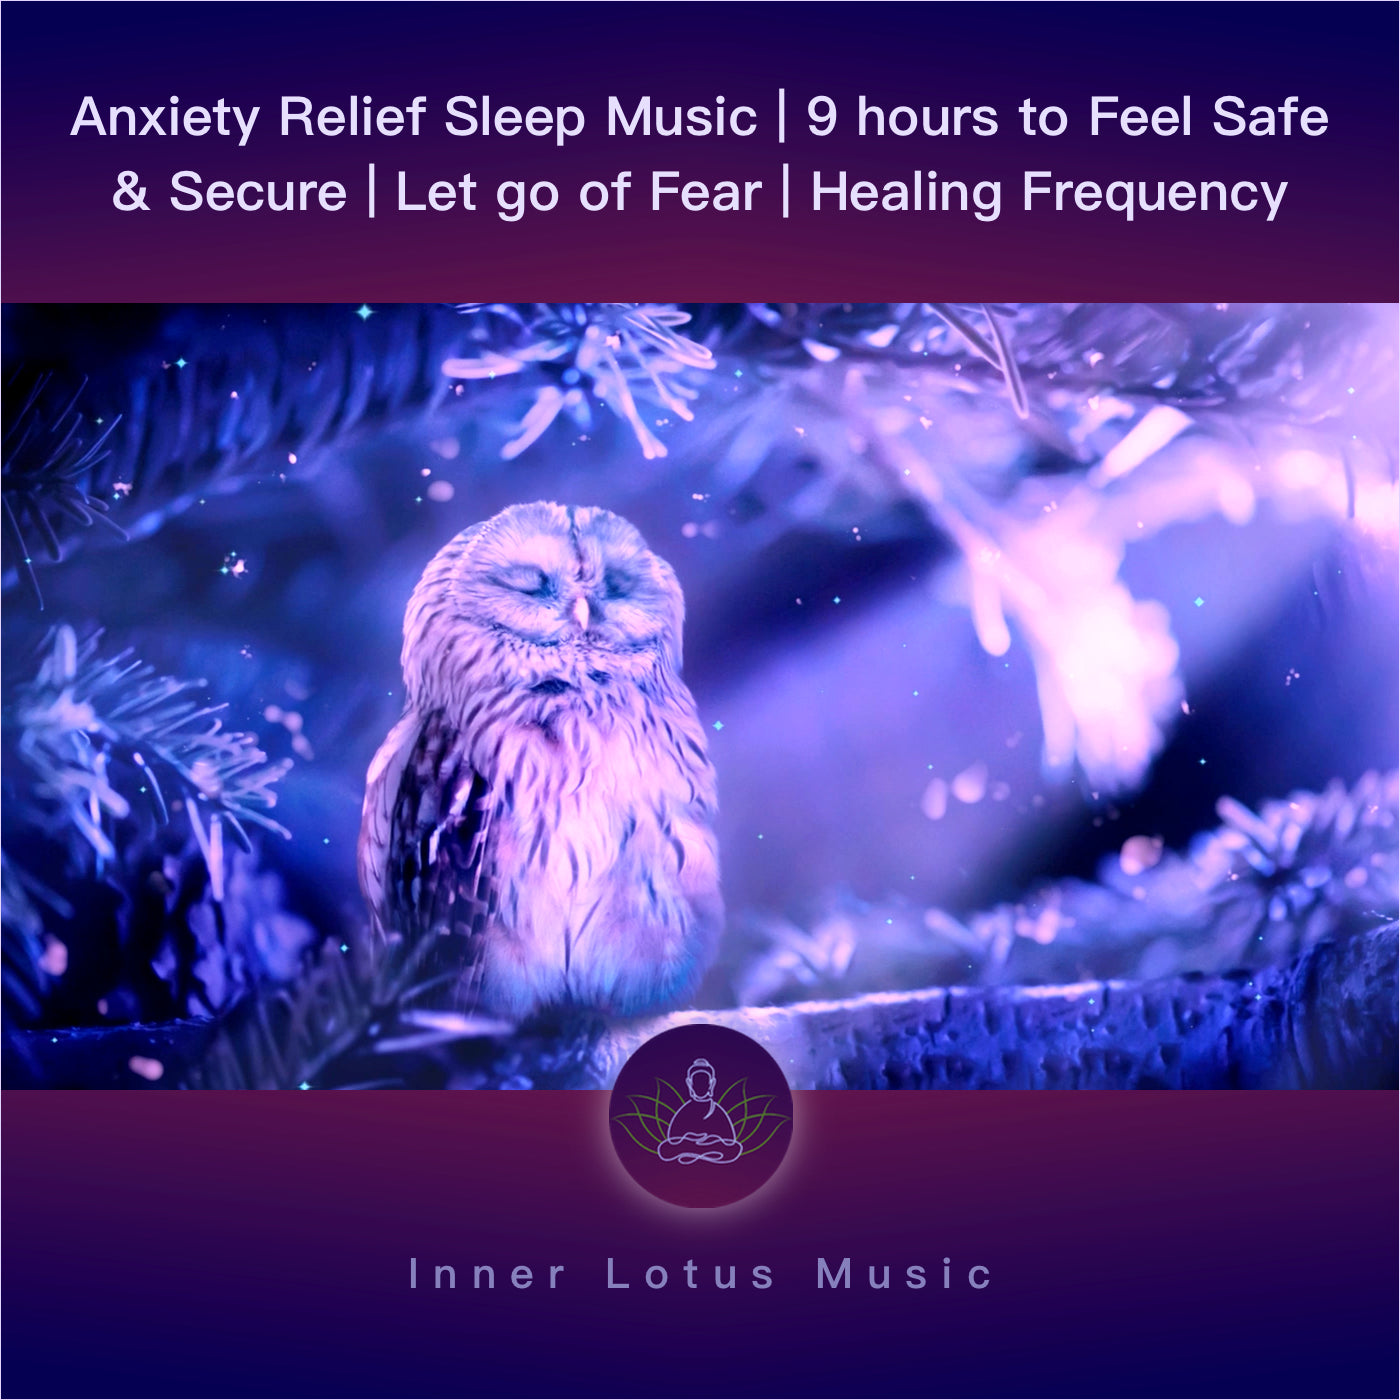 Anxiety Relief Sleep Music | 9 hours to Feel Safe & Secure | Let go of Fear | Healing Frequency